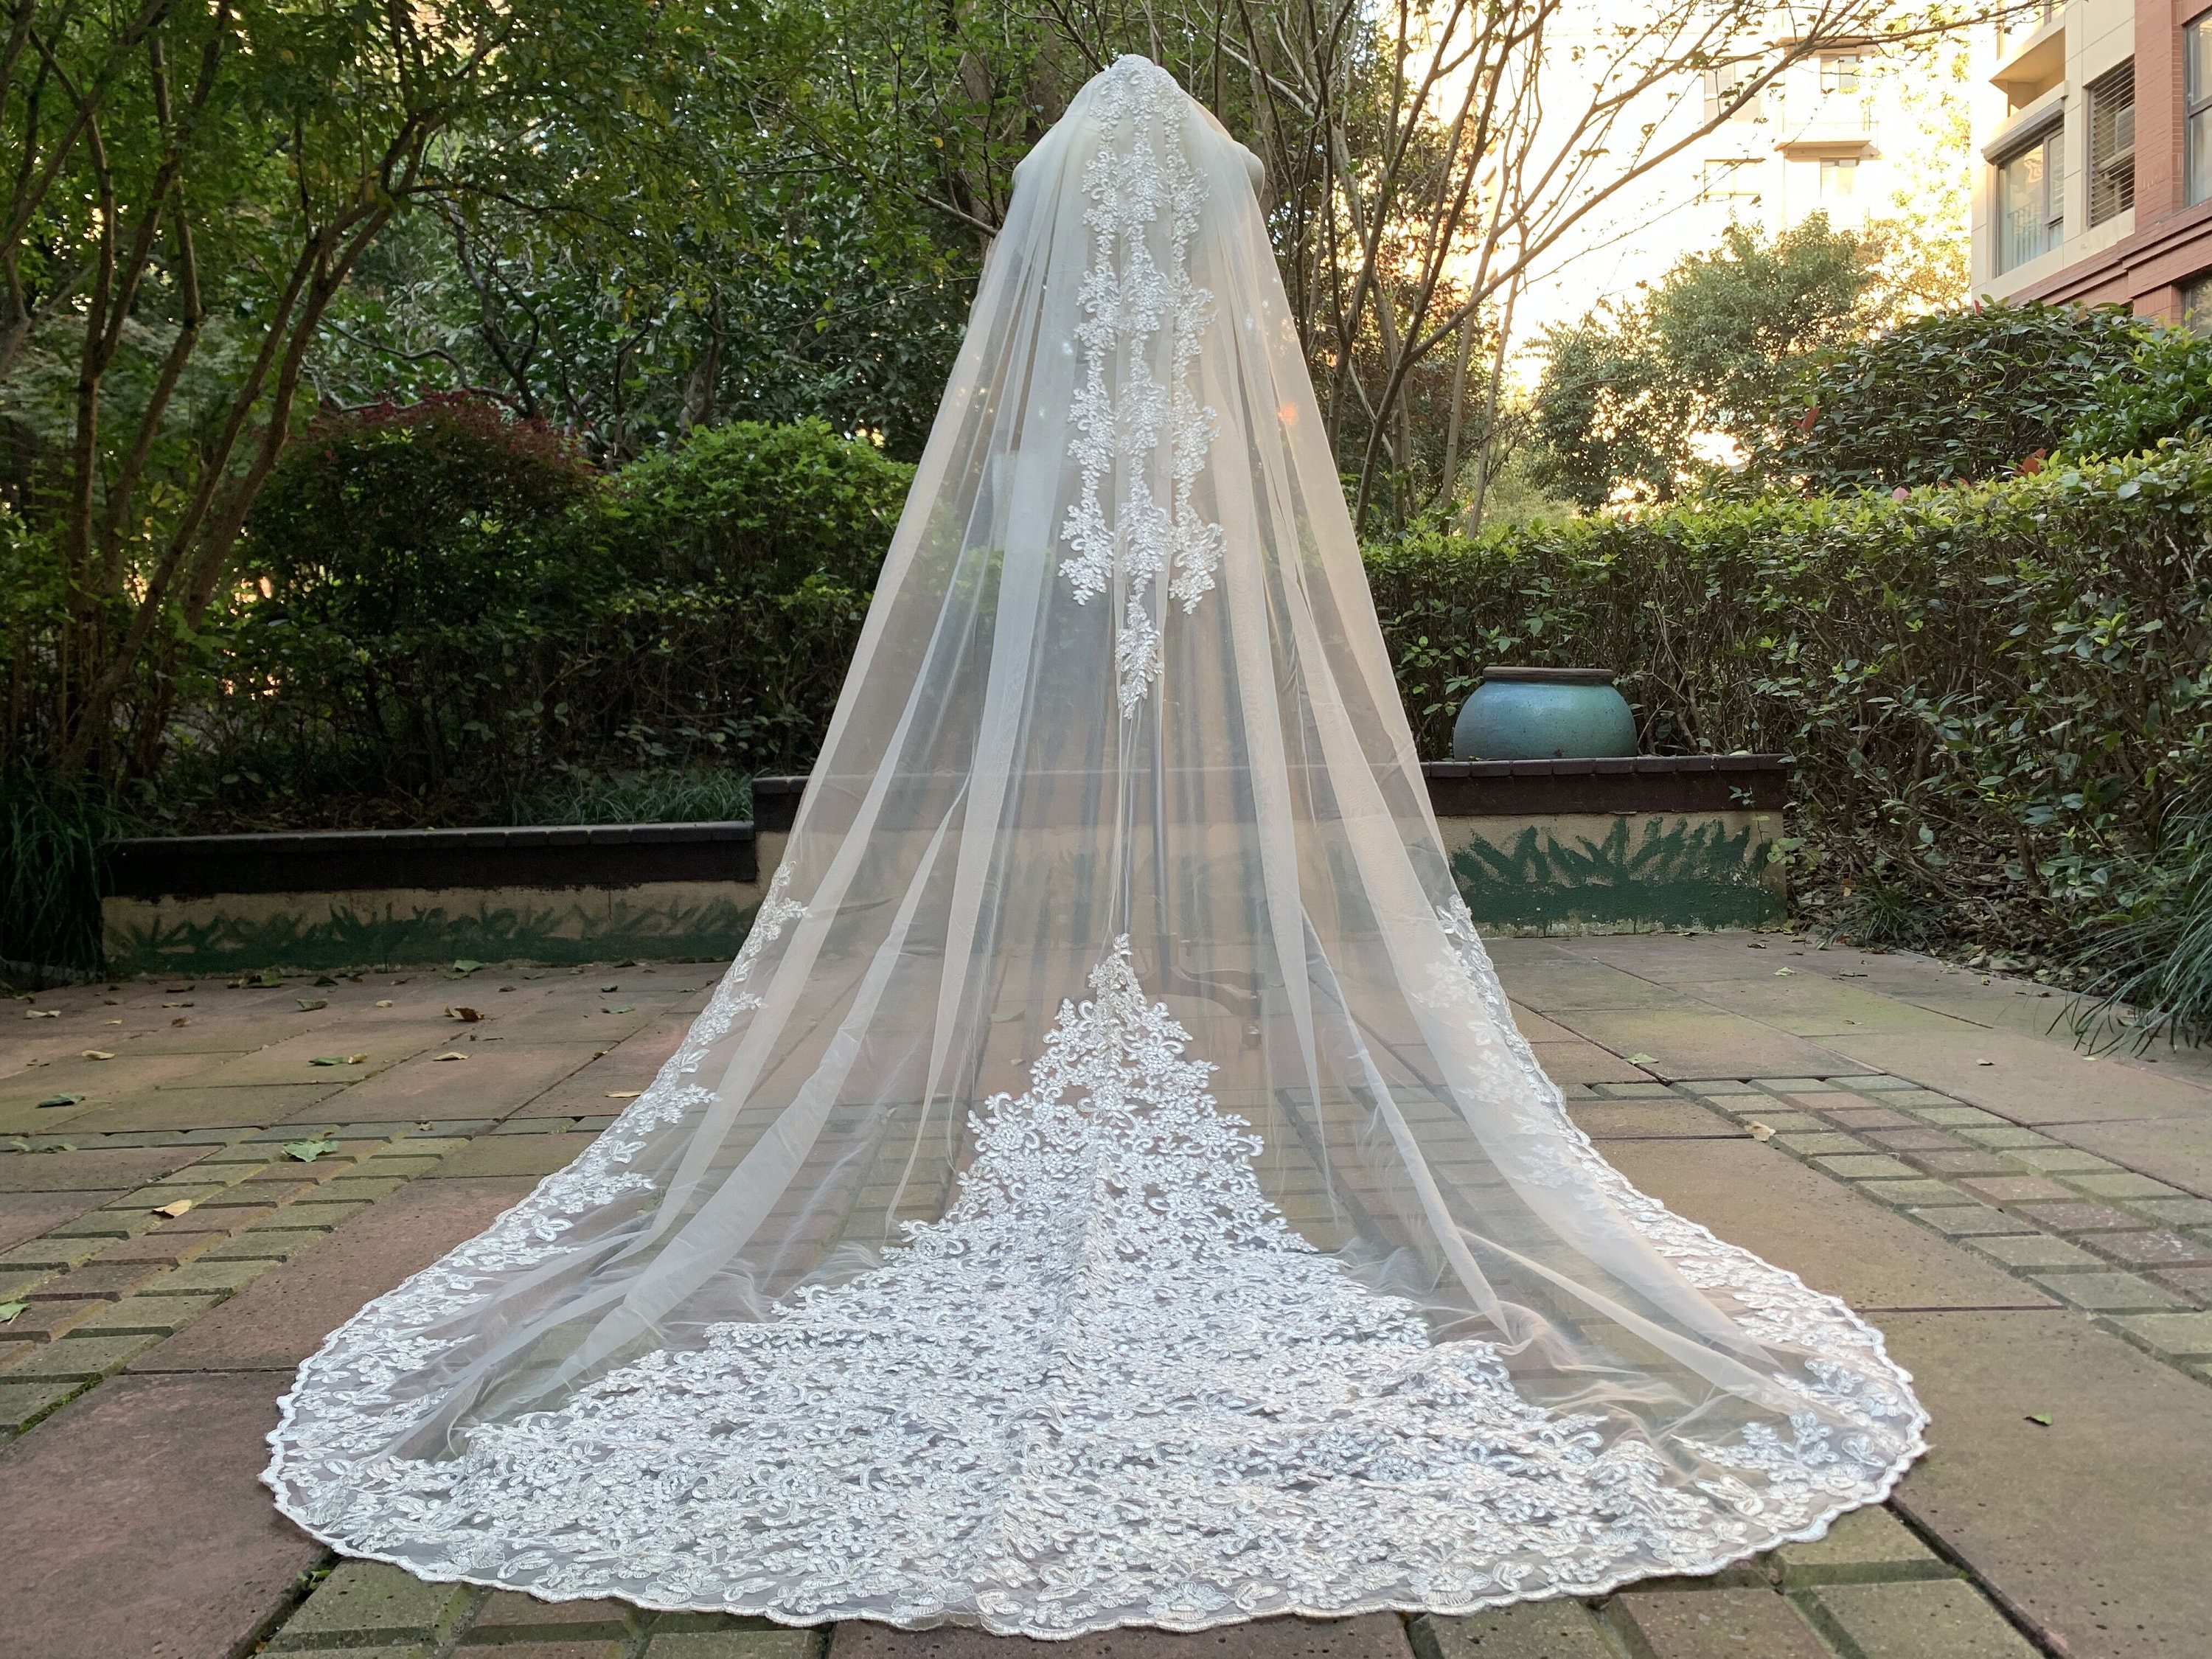 TOPQUEEN V70 Lace Edge Bride Veil 3m Cathedral Length Wedding Veil with Comb  Bridal Veils Long Cathedral Style Spanish Lace